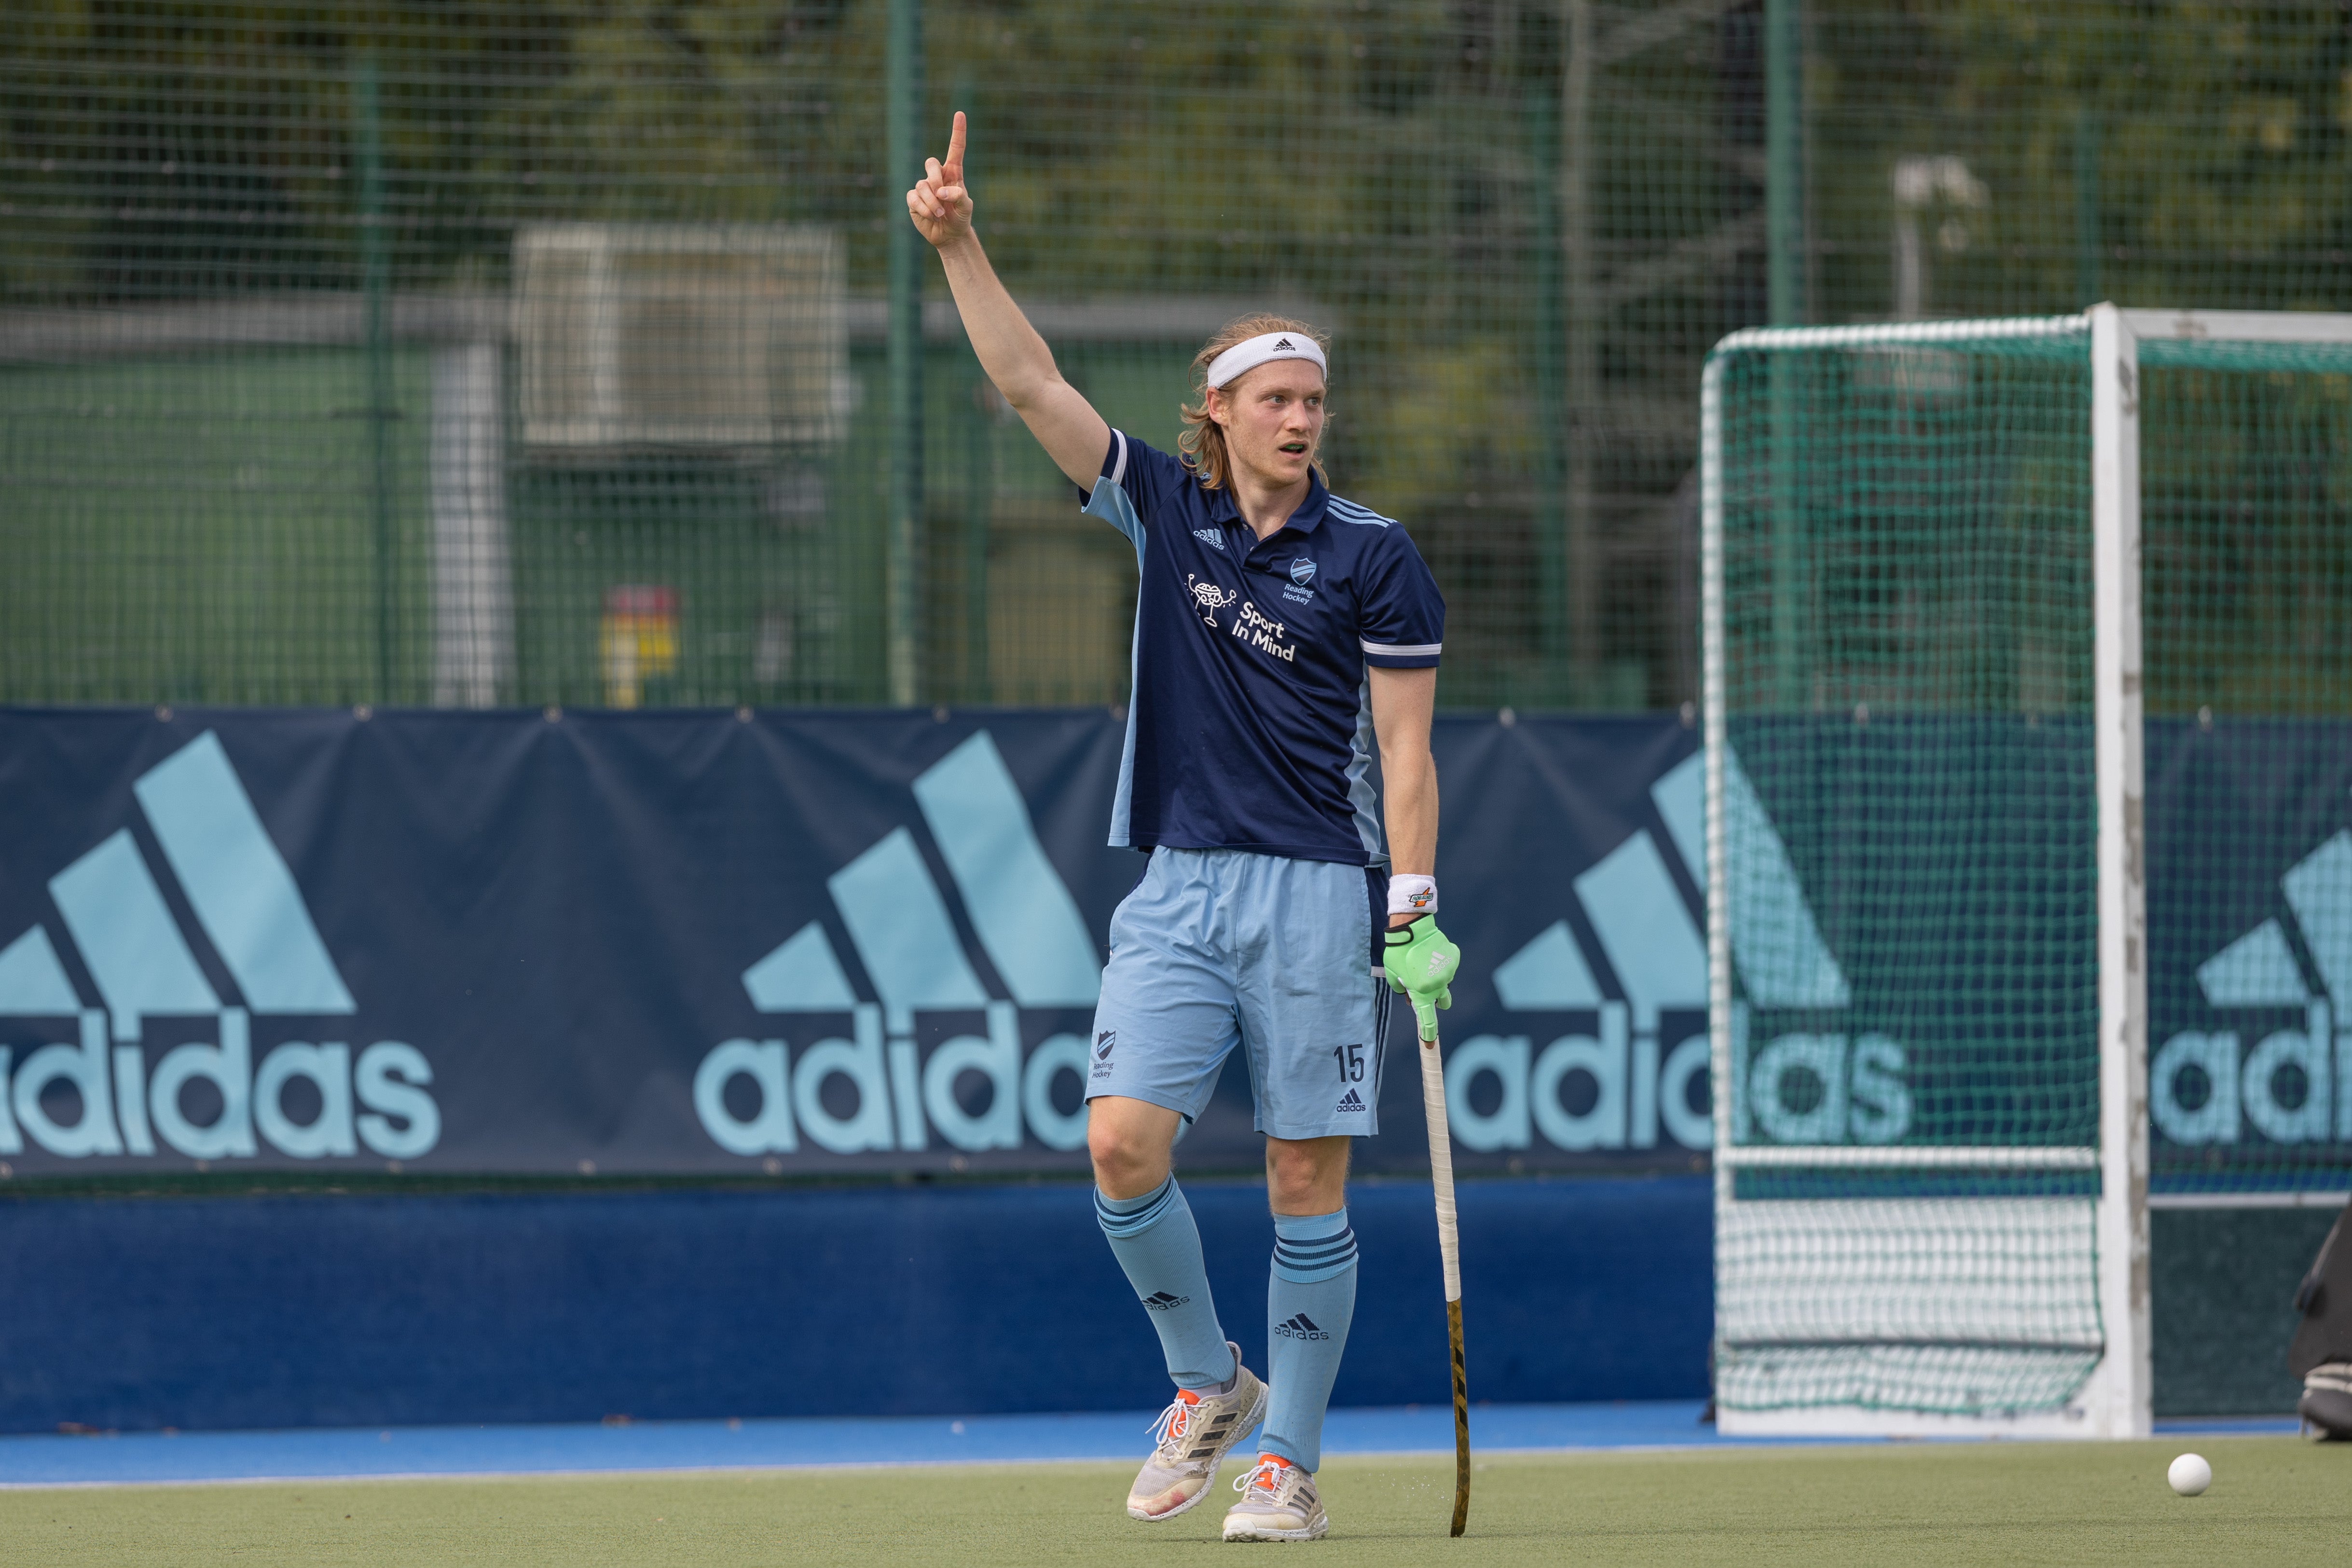 Oxted Mens 1s - Oxted Hockey Club - Oxted, GB - Field Hockey - Hudl